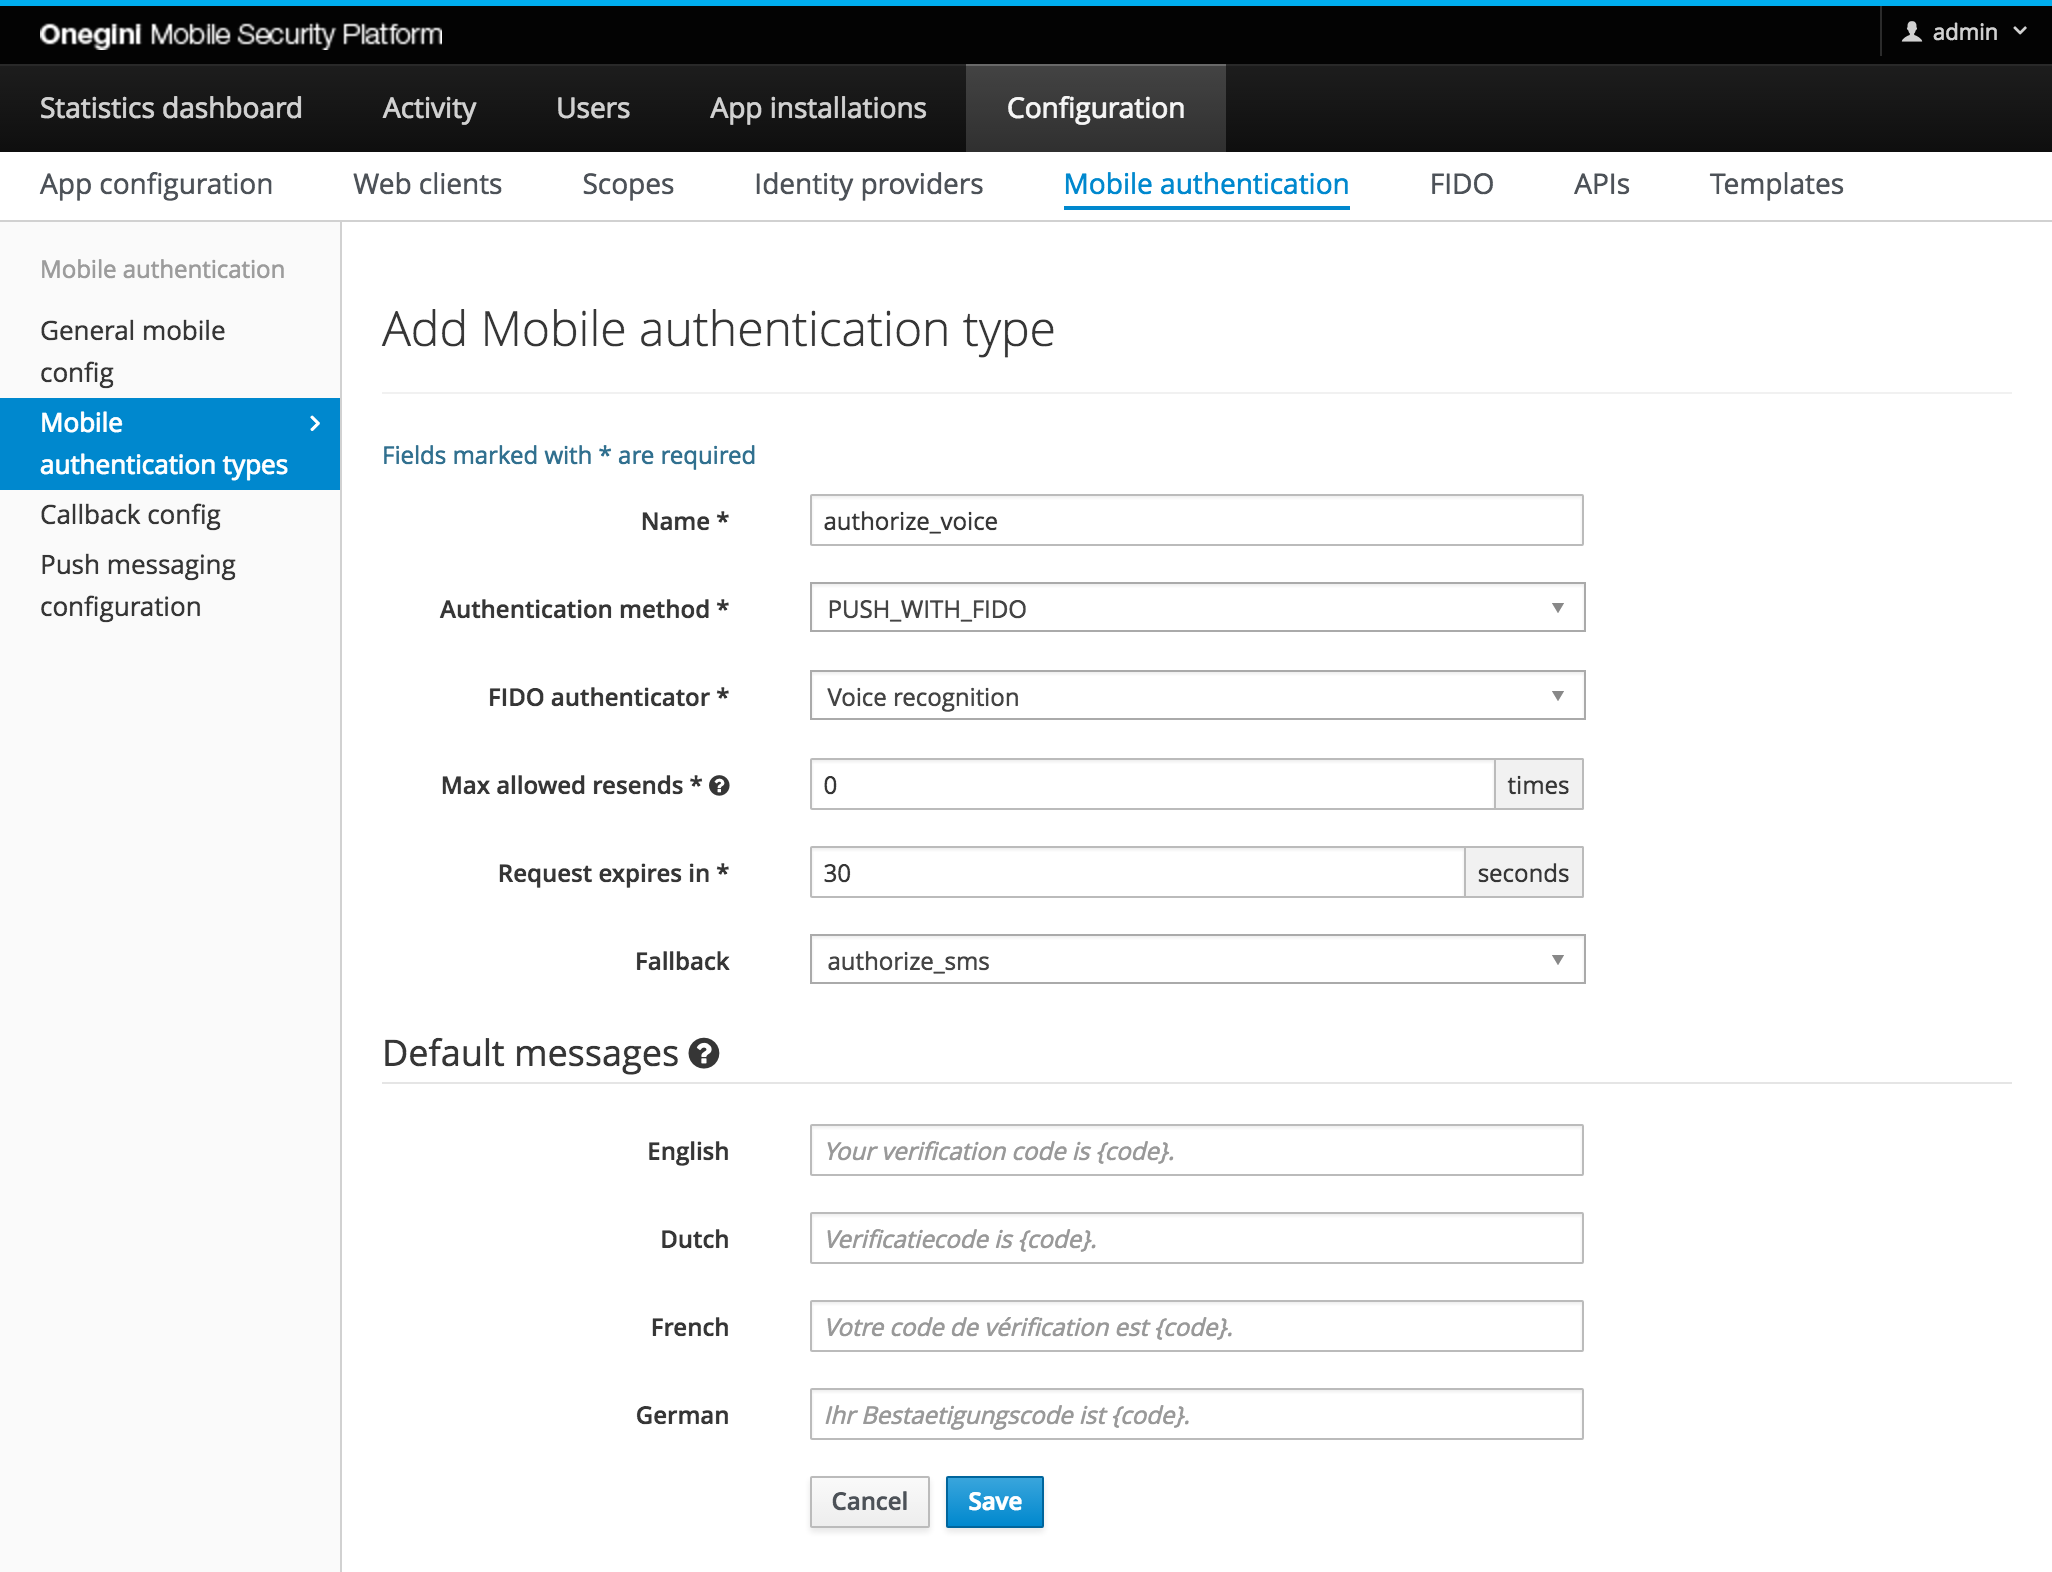 Mobile authentication with FIDO